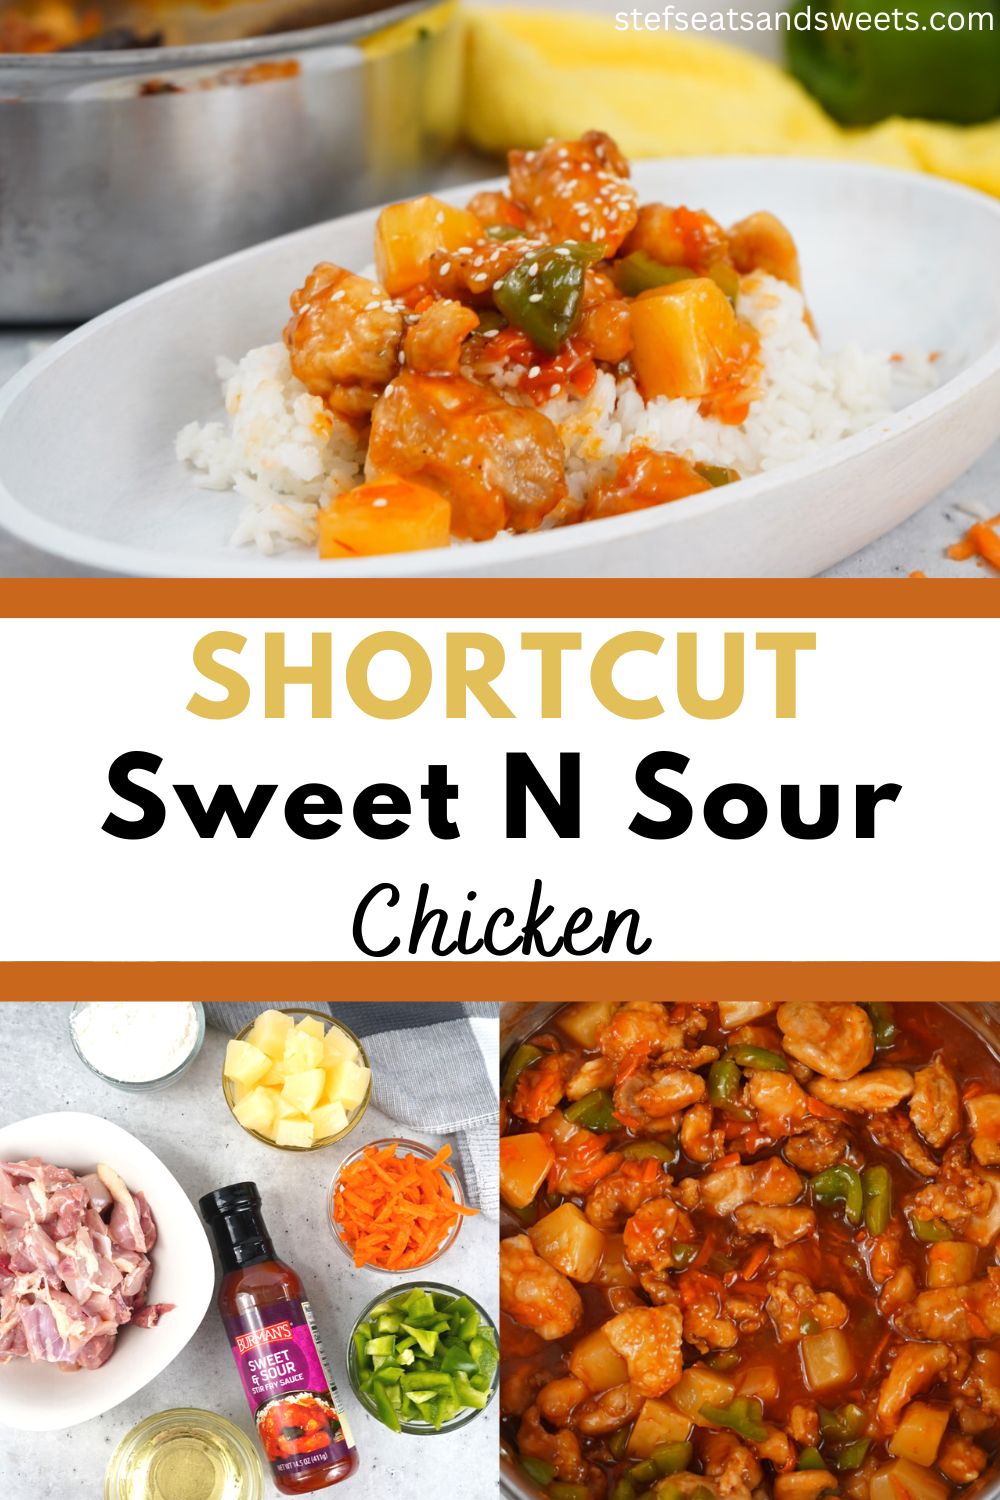 Shortcut Chicken with Sweet N Sour Sauce